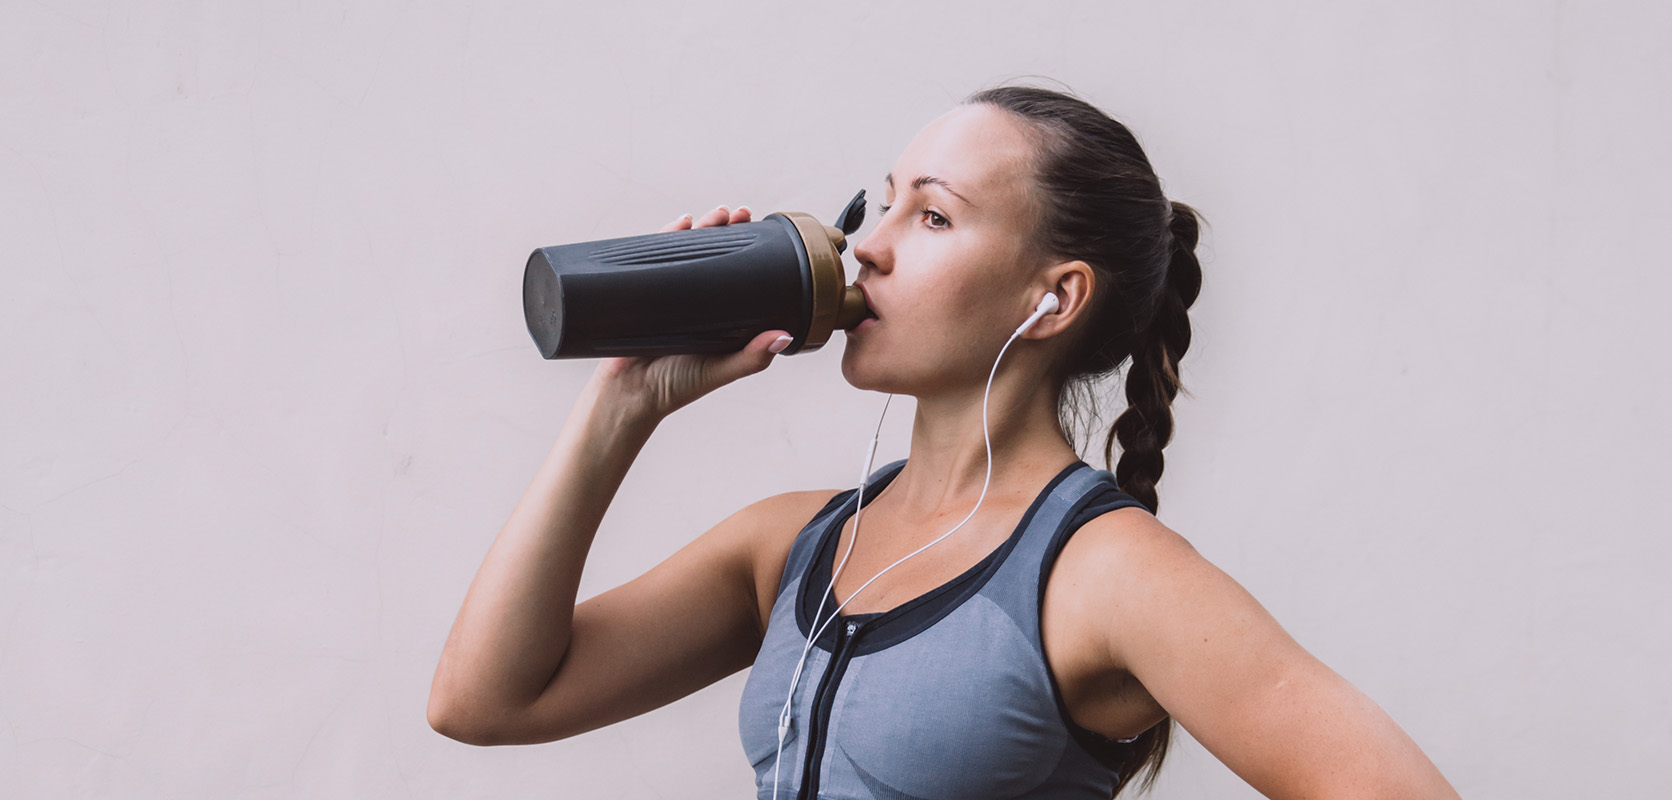 Athletic woman with headphones drinking water. buy weed online in canada. mail order marijuana online dispensary.